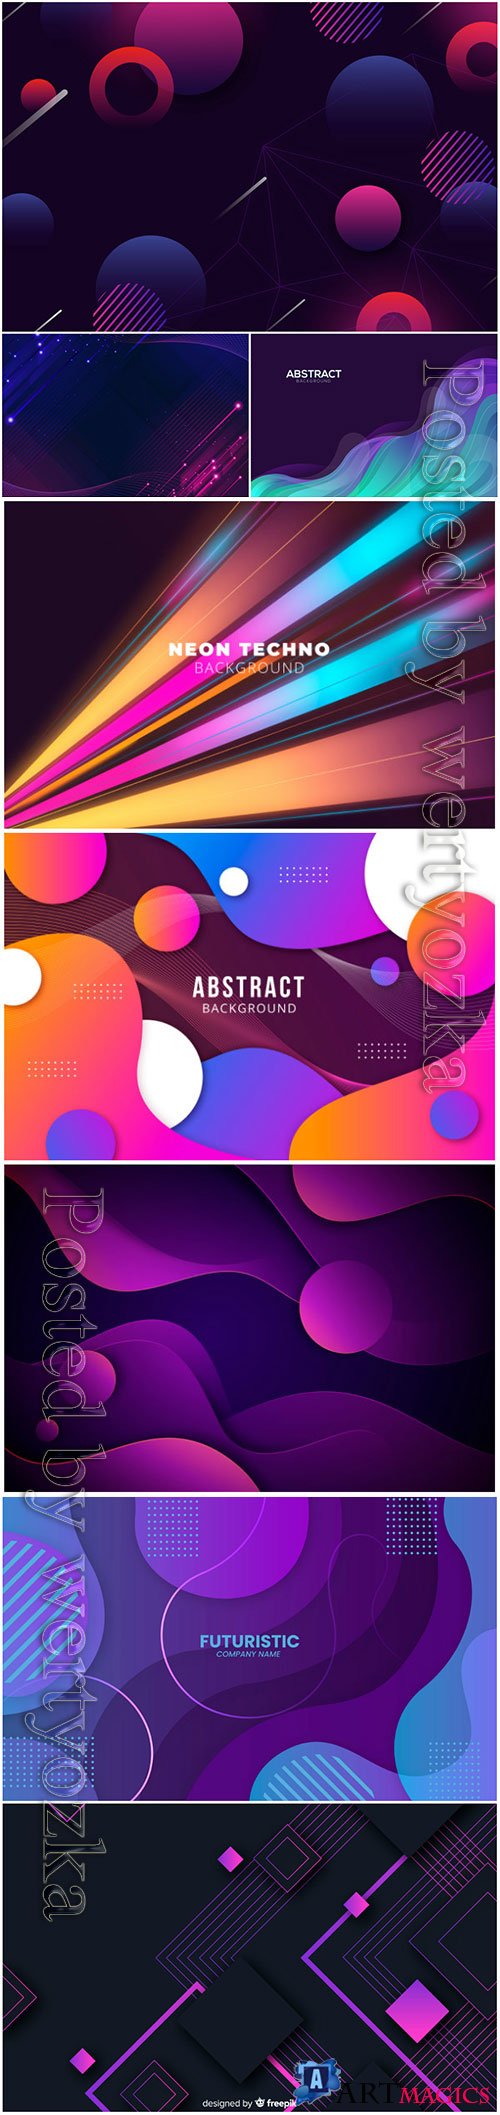 Luxury abstract backgrounds in vector # 2